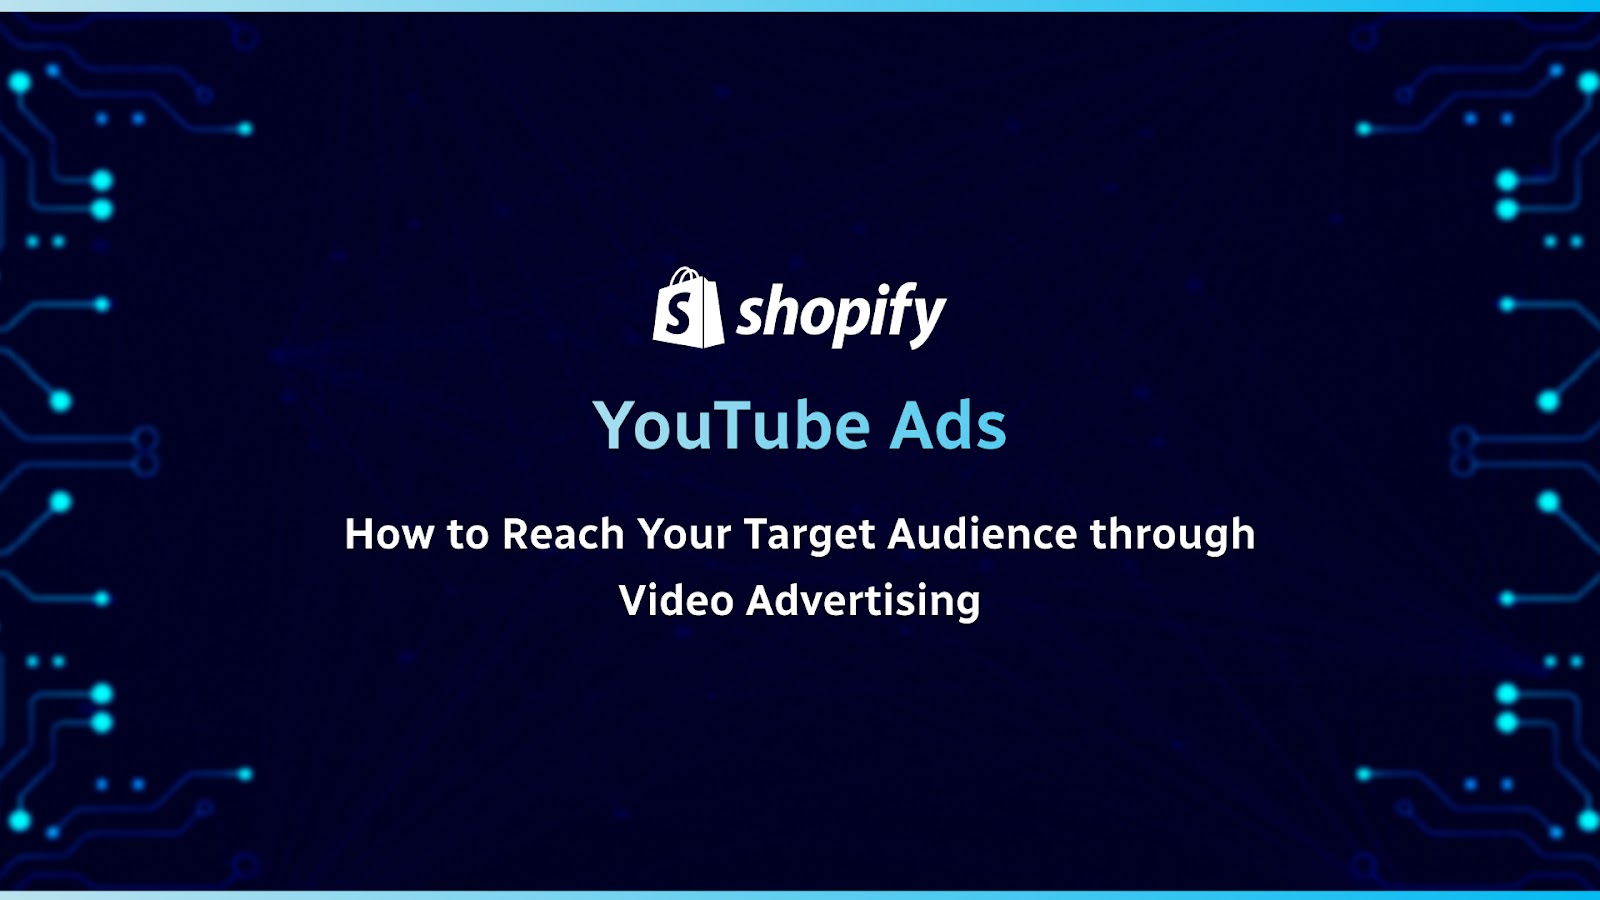 YouTube Ads: How to Reach Your Target Audience through Video Advertising